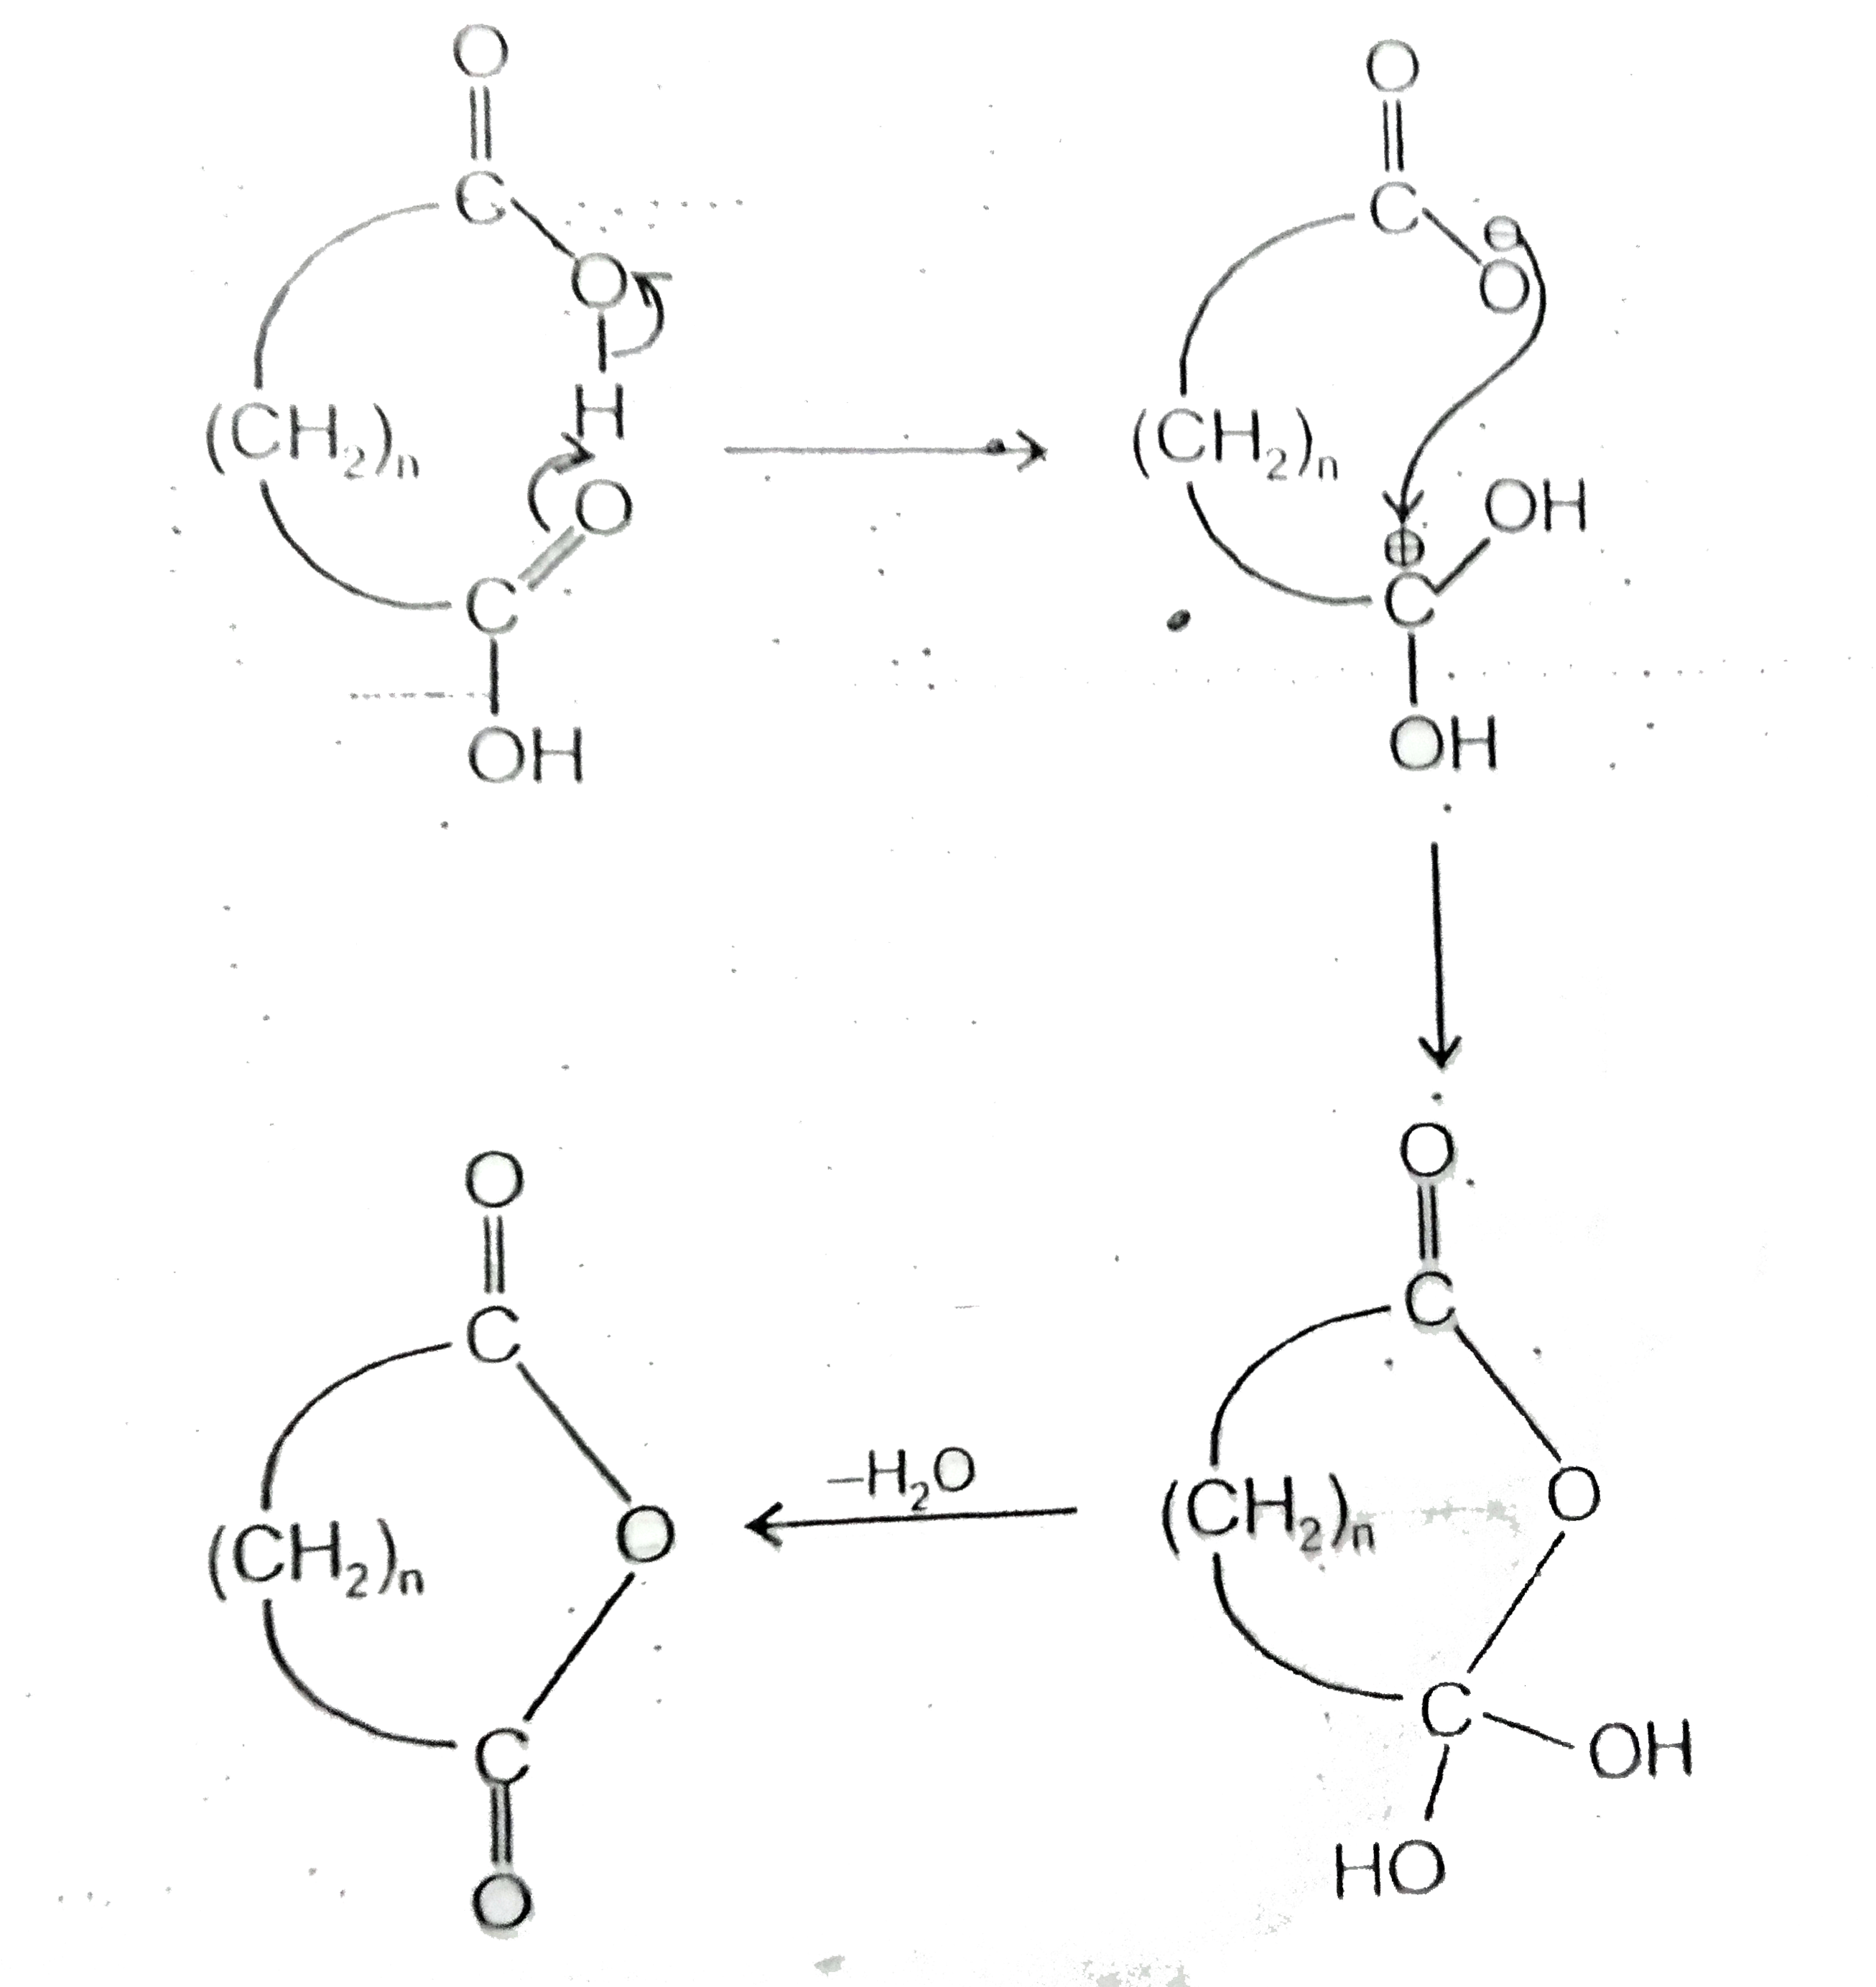 Certain  dicarboxylic acids spontaneously eliminate water when heated forming cycioc anhydirides. But for the reaction to be successfully. The cyclic anhydrides product must normally have a ring size of fivee or six members. There are two important reasons, first, the second carboxyl group can serve as the acid catalyst (by intramolecular proton transfer), as well as the nucleophile. And second, the high temperature involved reduce the need for catalyst.      Consider the following sequence of reaction,      The final product of the reaction would be